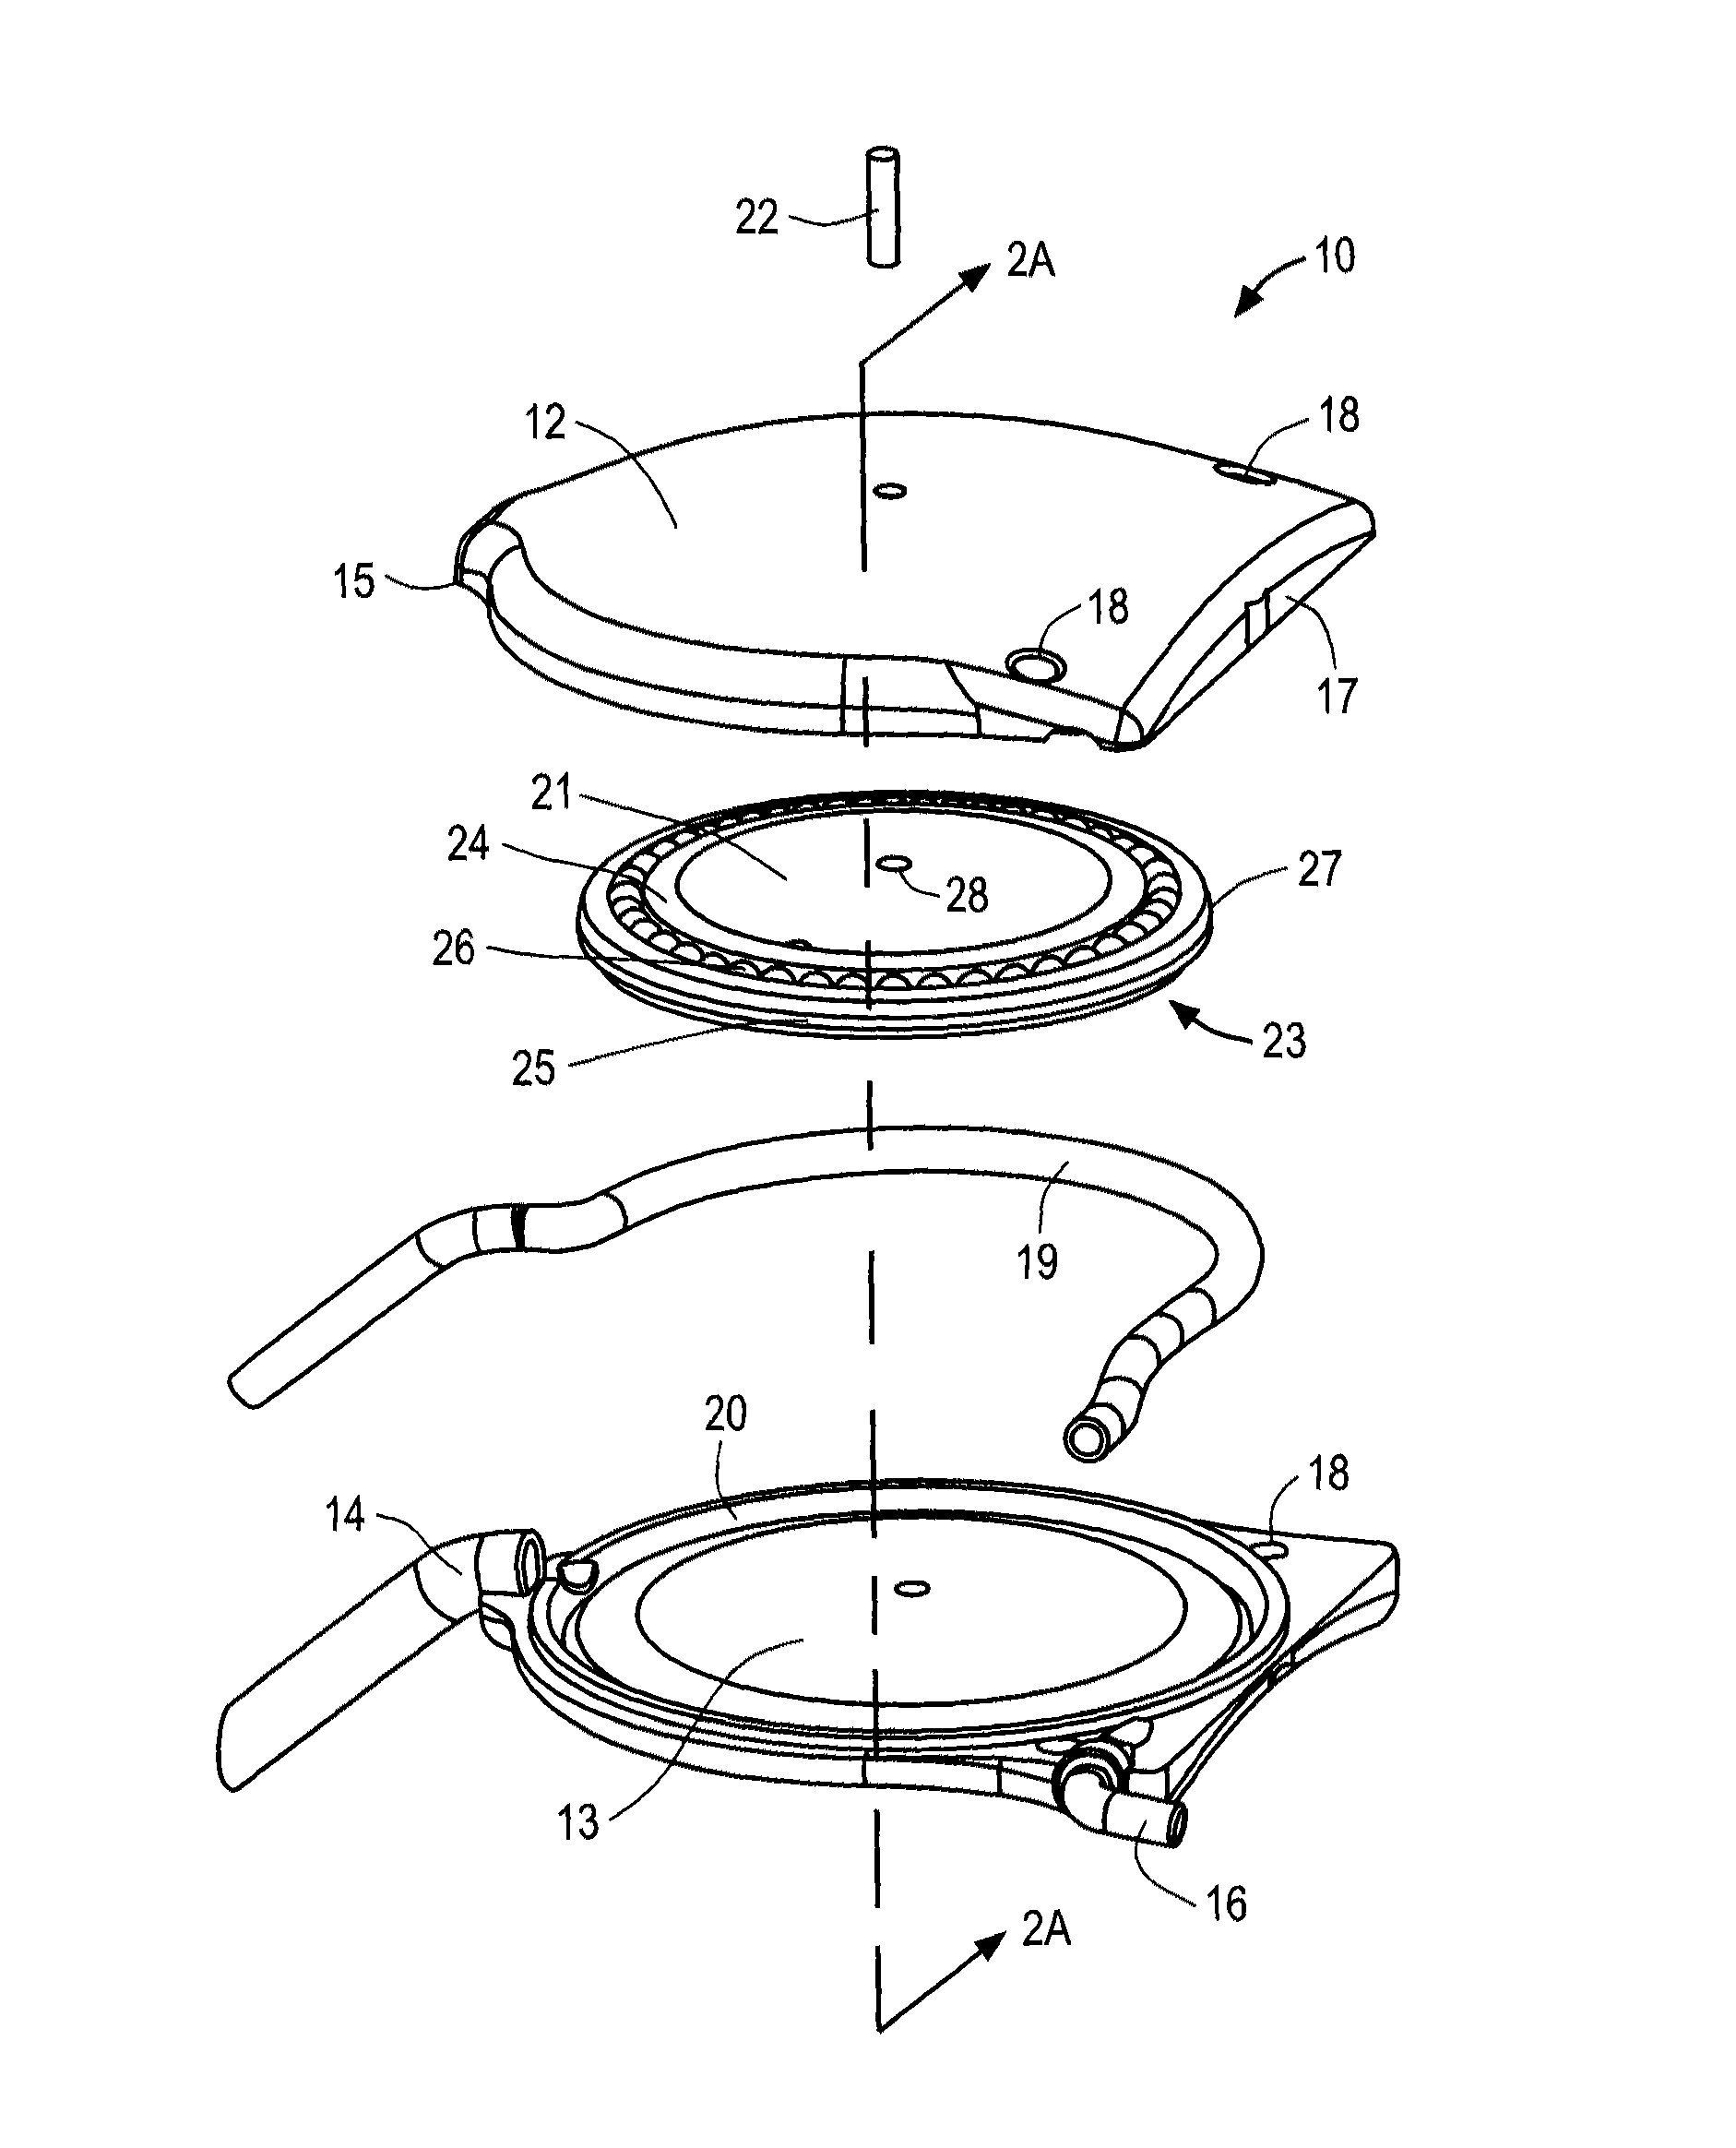 Apparatus and methods for treating excess intraocular fluid